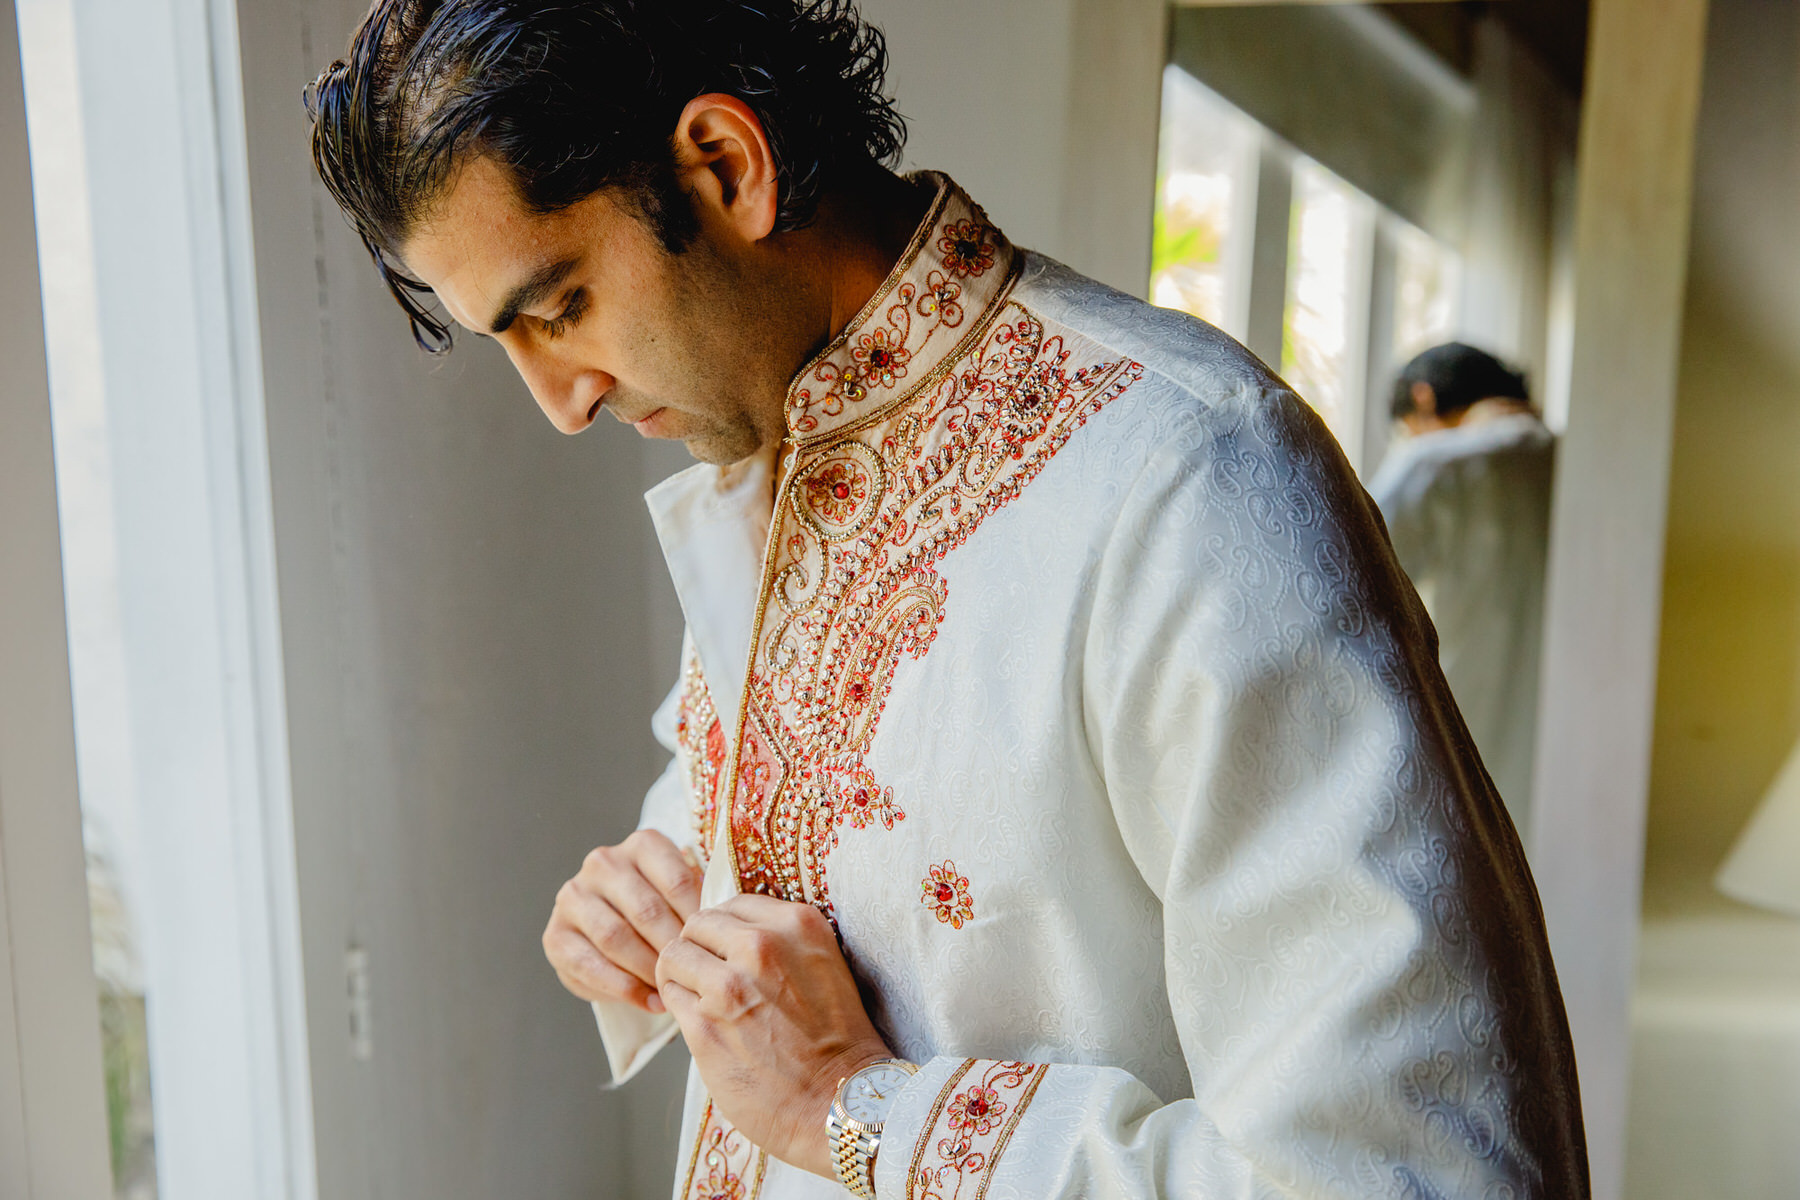 groom emanating charm and grace at his Indian wedding in Cartagena.